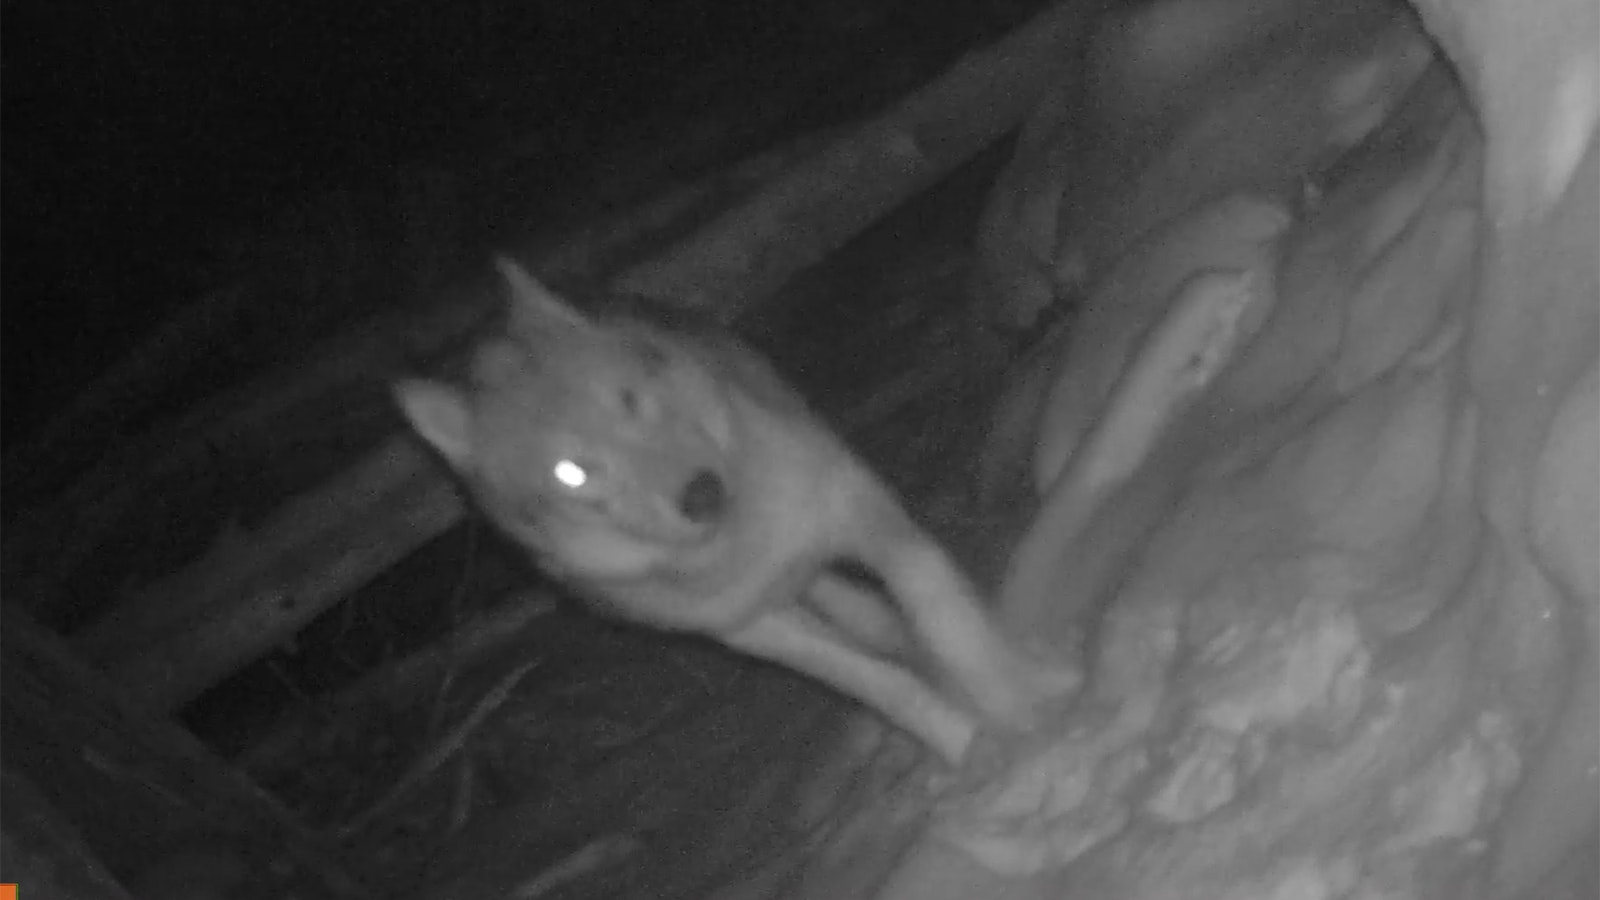 Wolf 907F, Yellowstone's aging matriarch at 11 years old, only has one eye. She's the fourth wolf to pass by this trail cam.